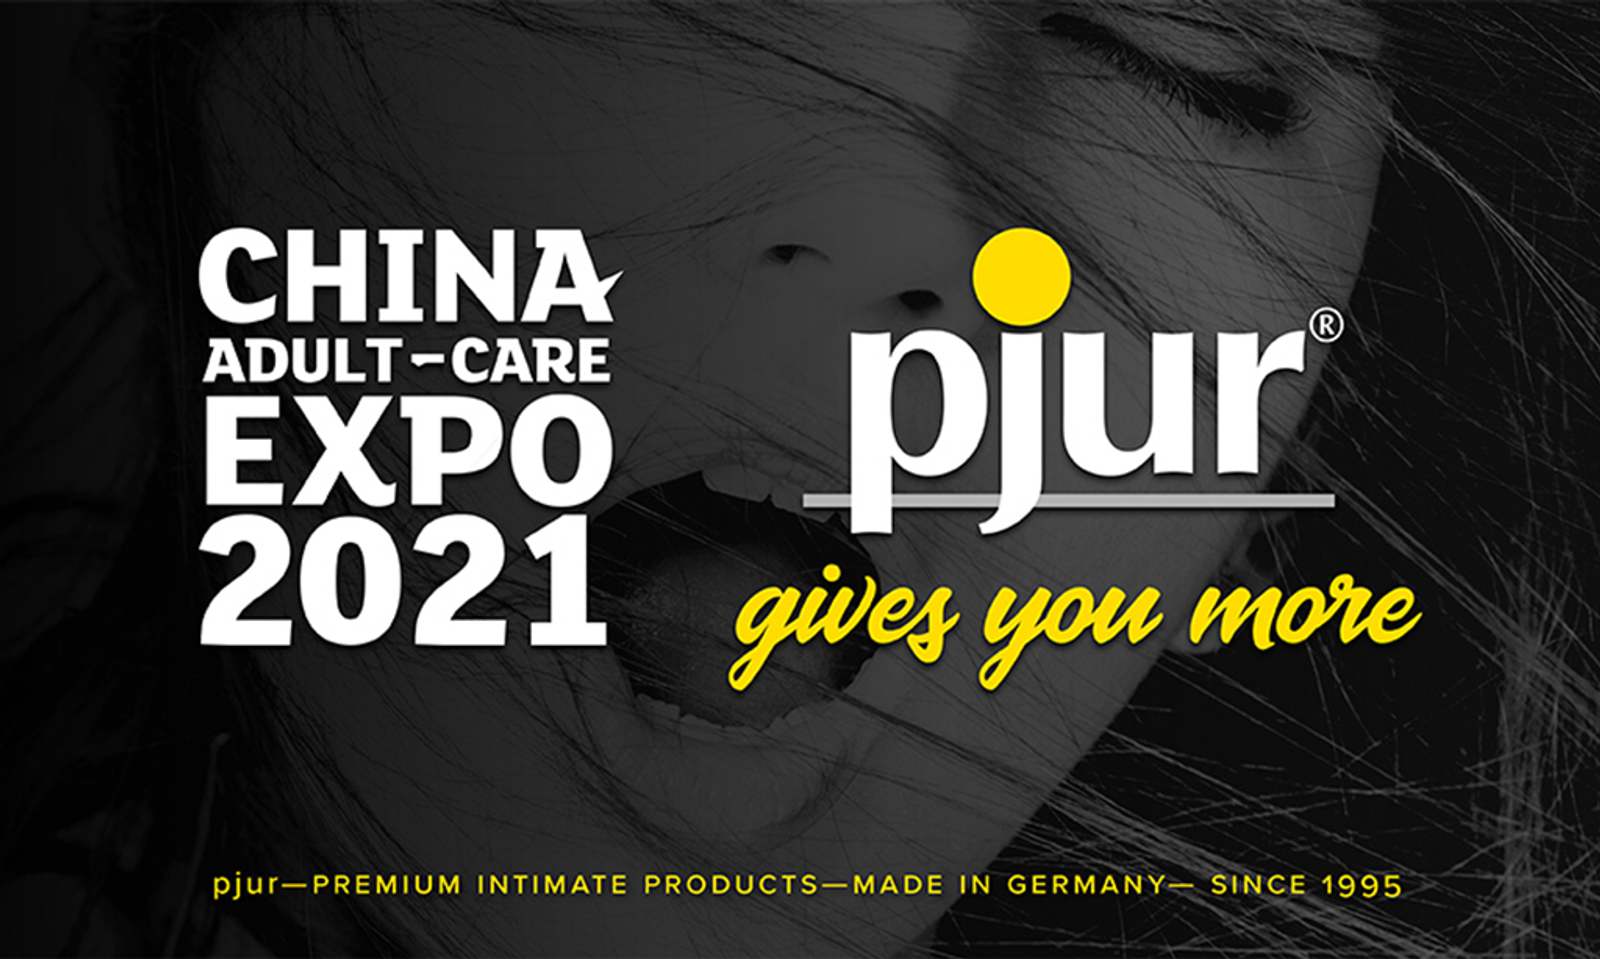 pjur to Exhibit at China's Adult-Care Expo in Shanghai